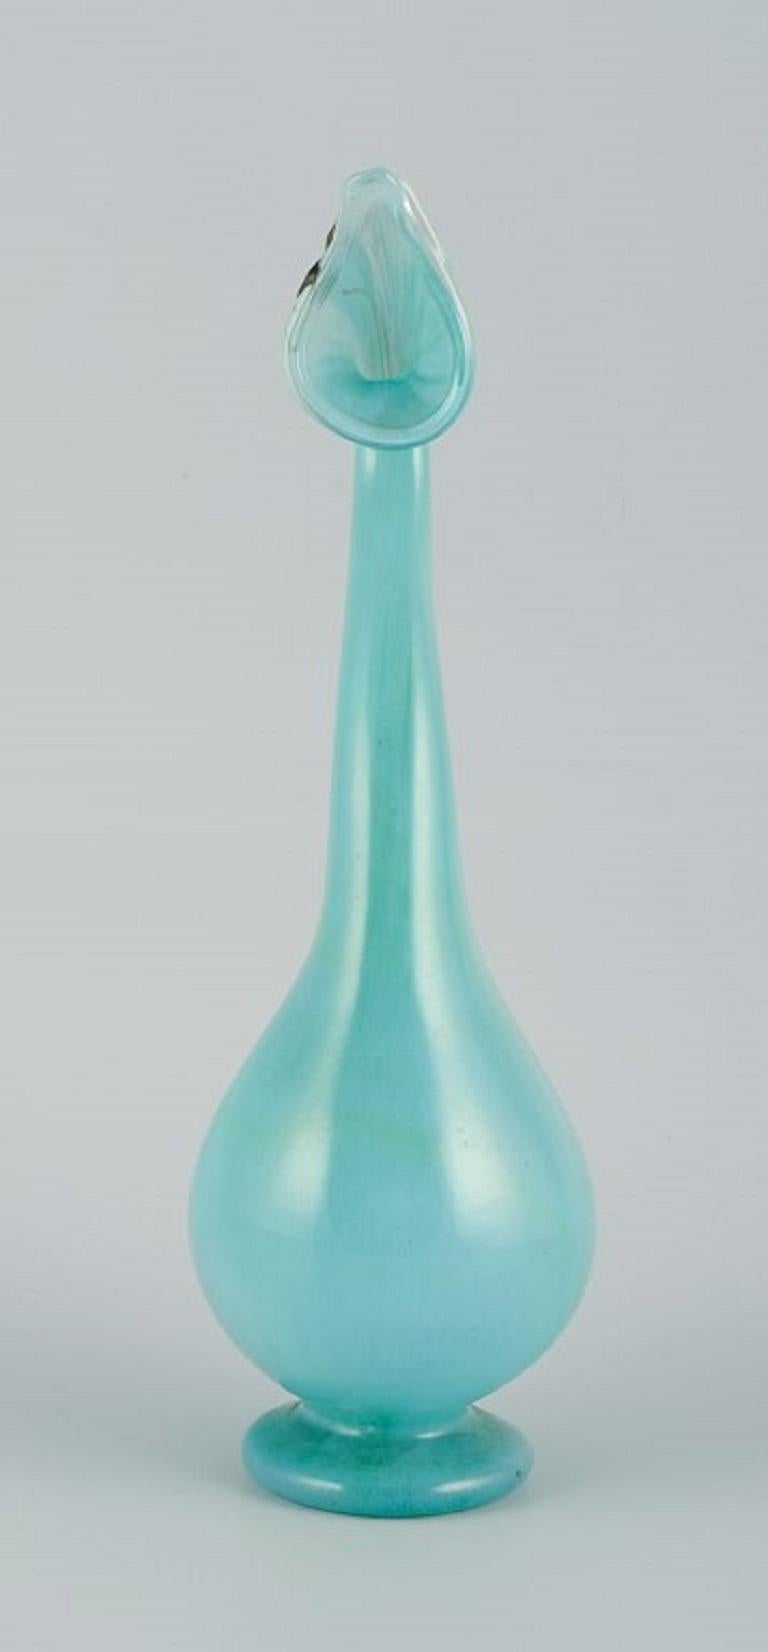 Murano, Venice, mouth-blown art glass vase in turquoise, organic form.
1960/70s.
In perfect condition.
Dimensions: H 24.0 x D 8.0 cm.